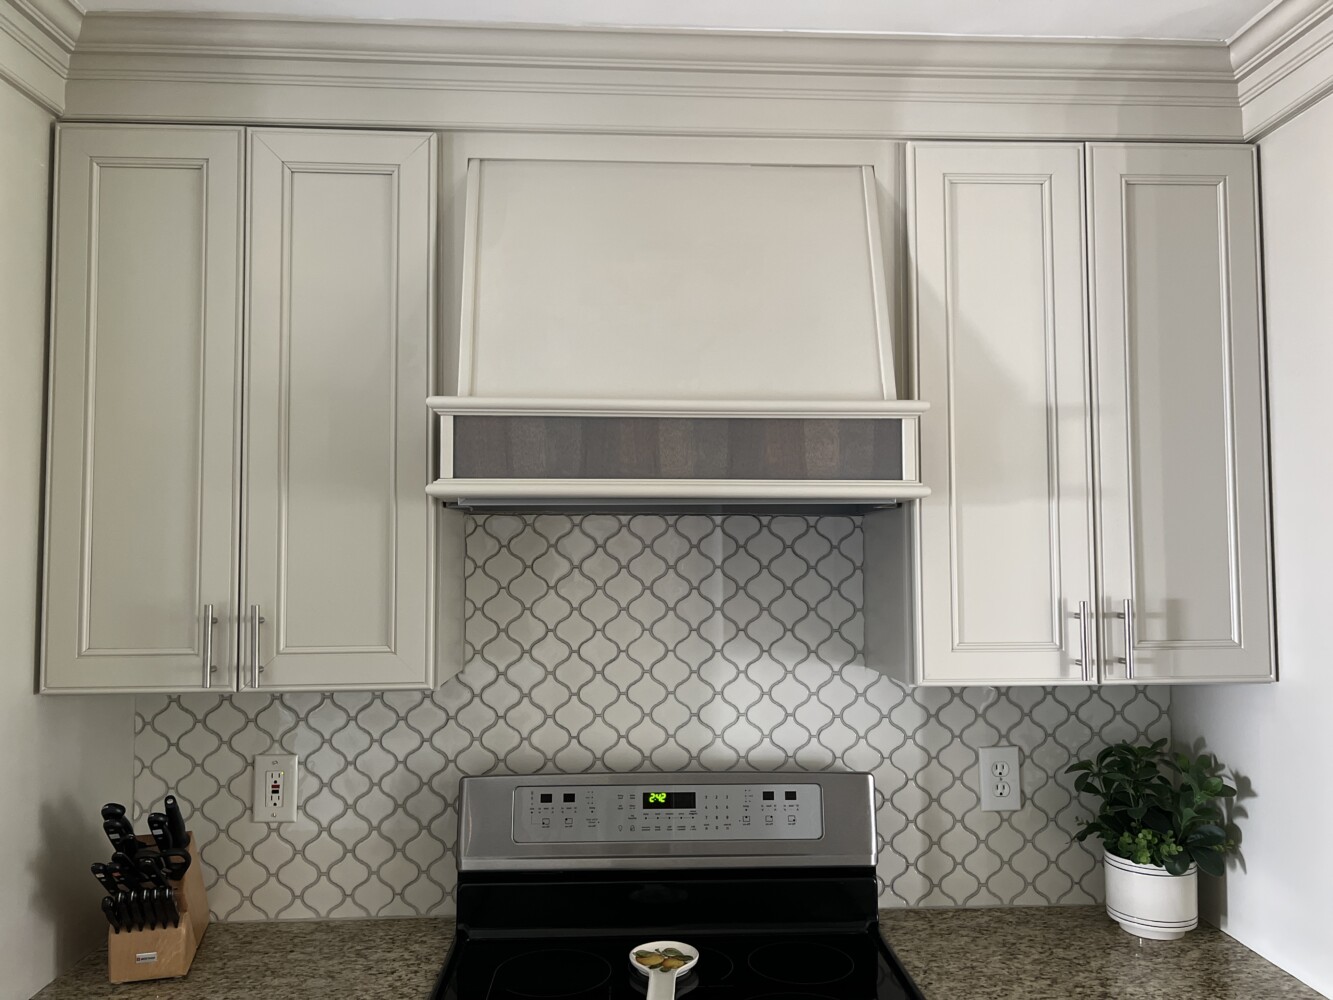 Replace your Microwave with a Hood Vent + Revere Pewter Kitchen ...